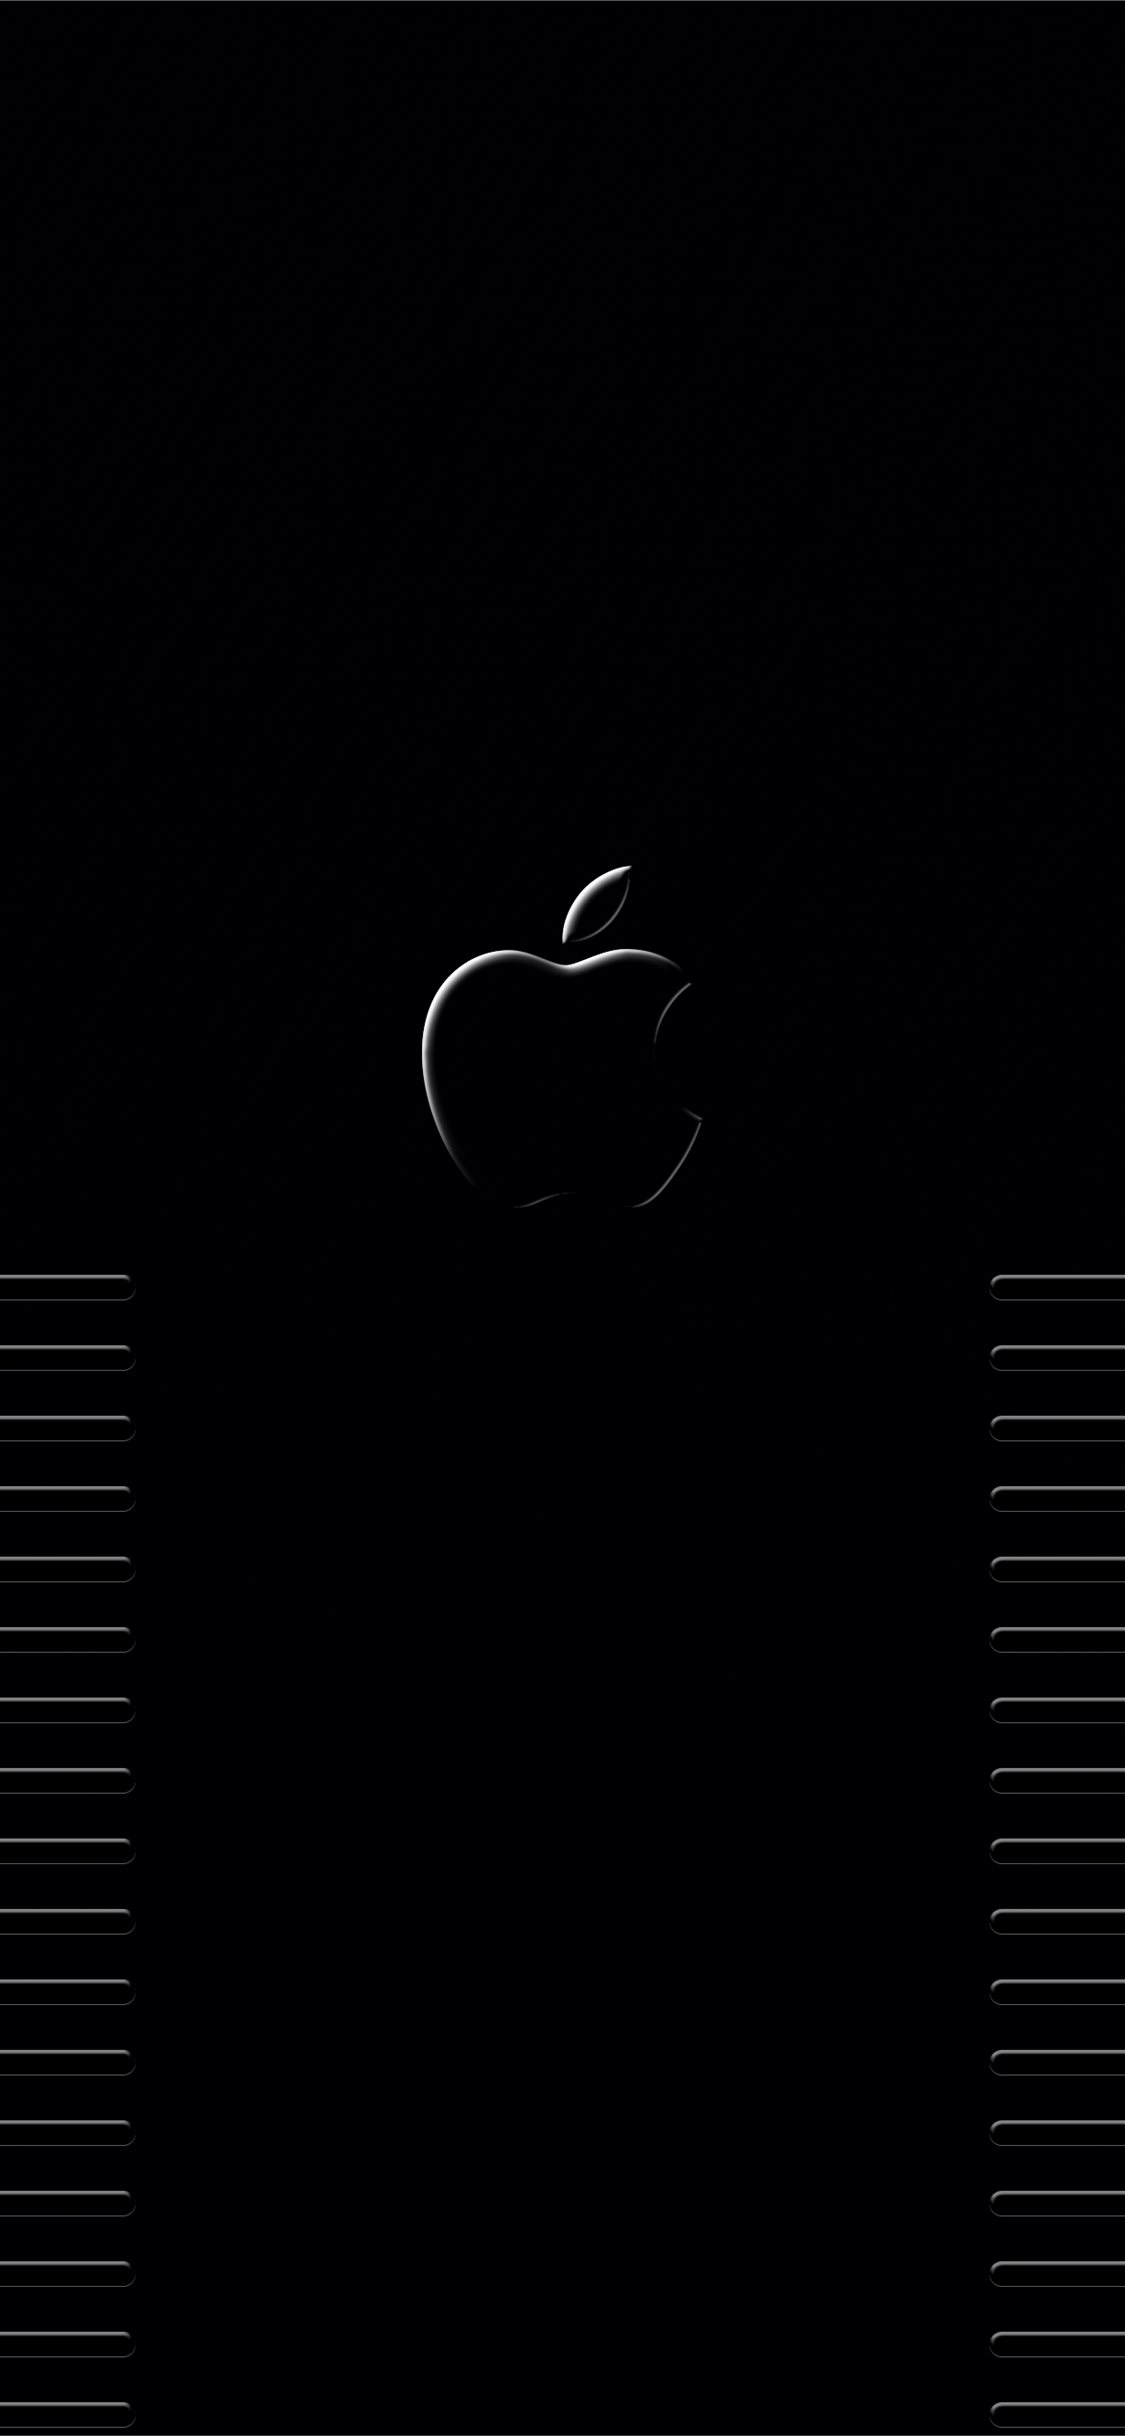 Plus Apple posted by Samantha Simpson iPhone wallpaper 